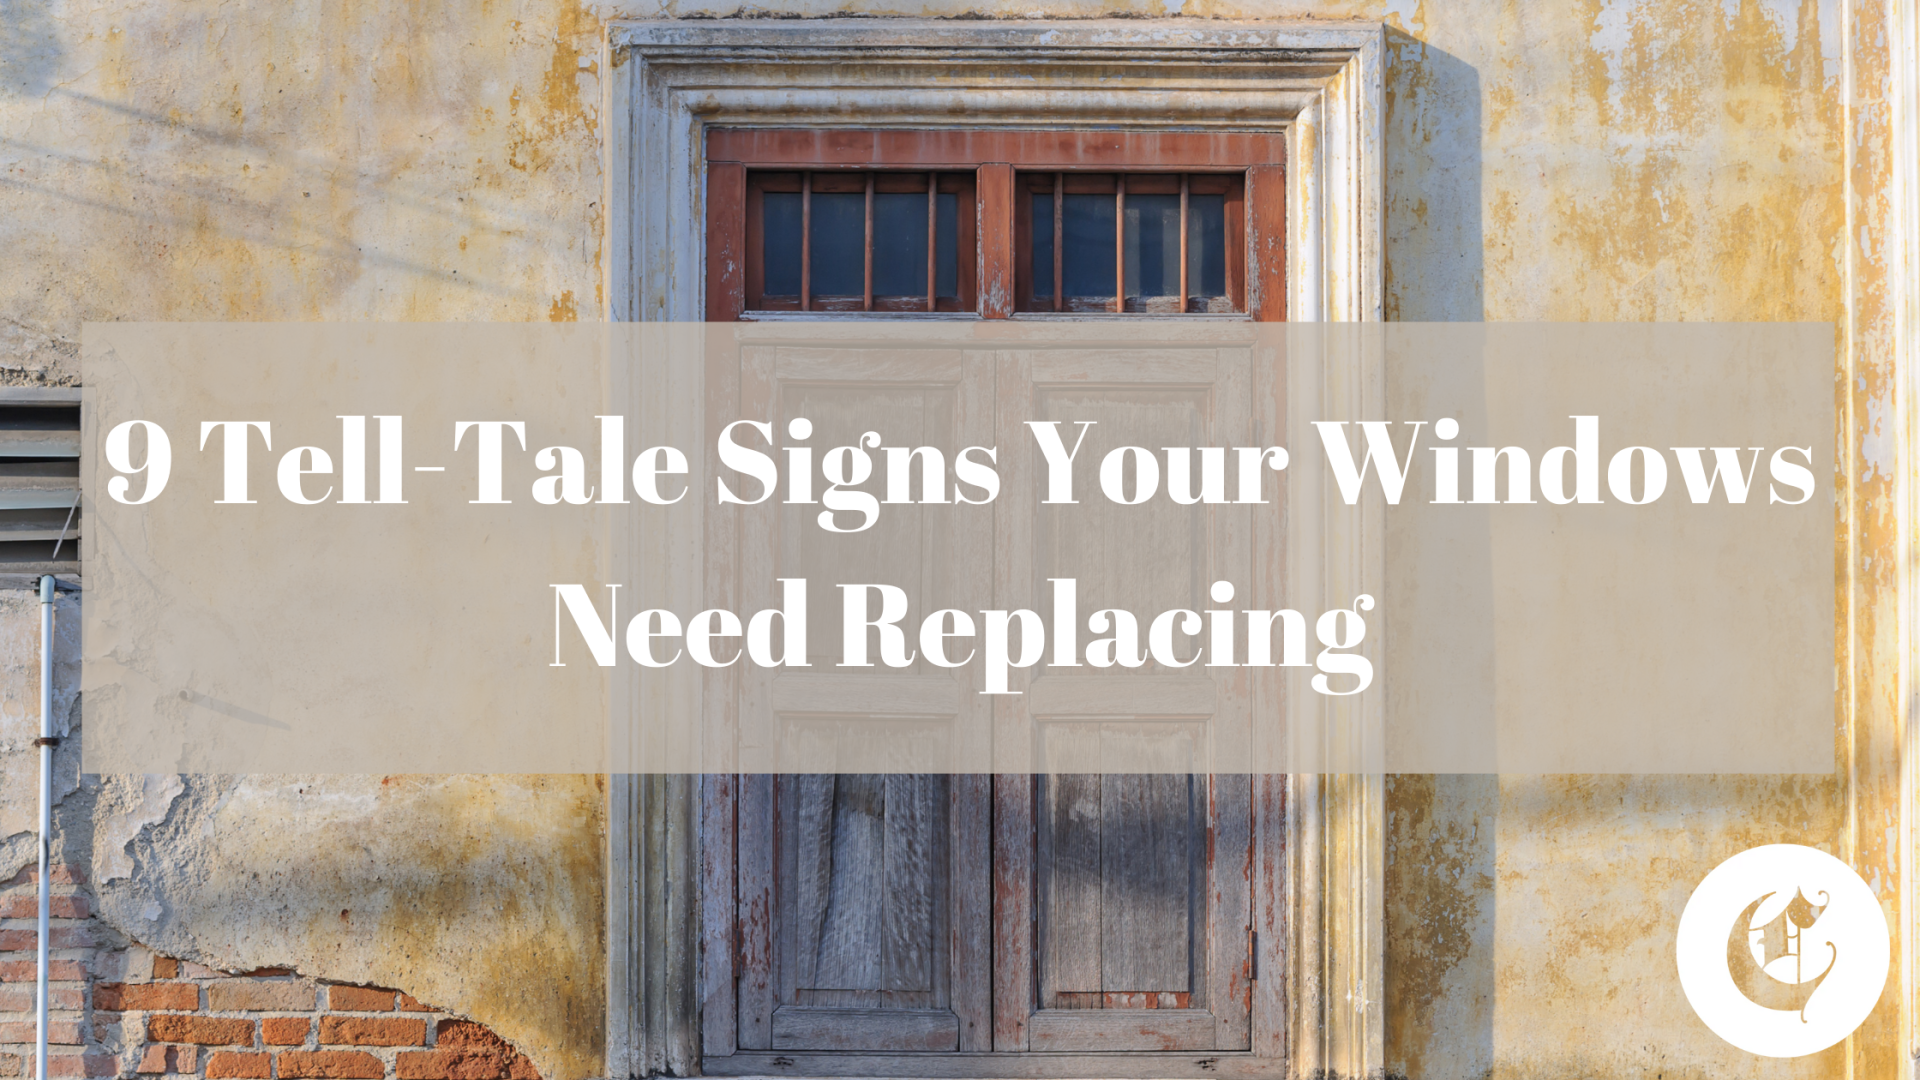 9 Tell-Tale Signs Your Windows Need Replacing, Window Repairs, Window Replacement, Best Window Installation Contractor Near Me, Sioux Falls SD